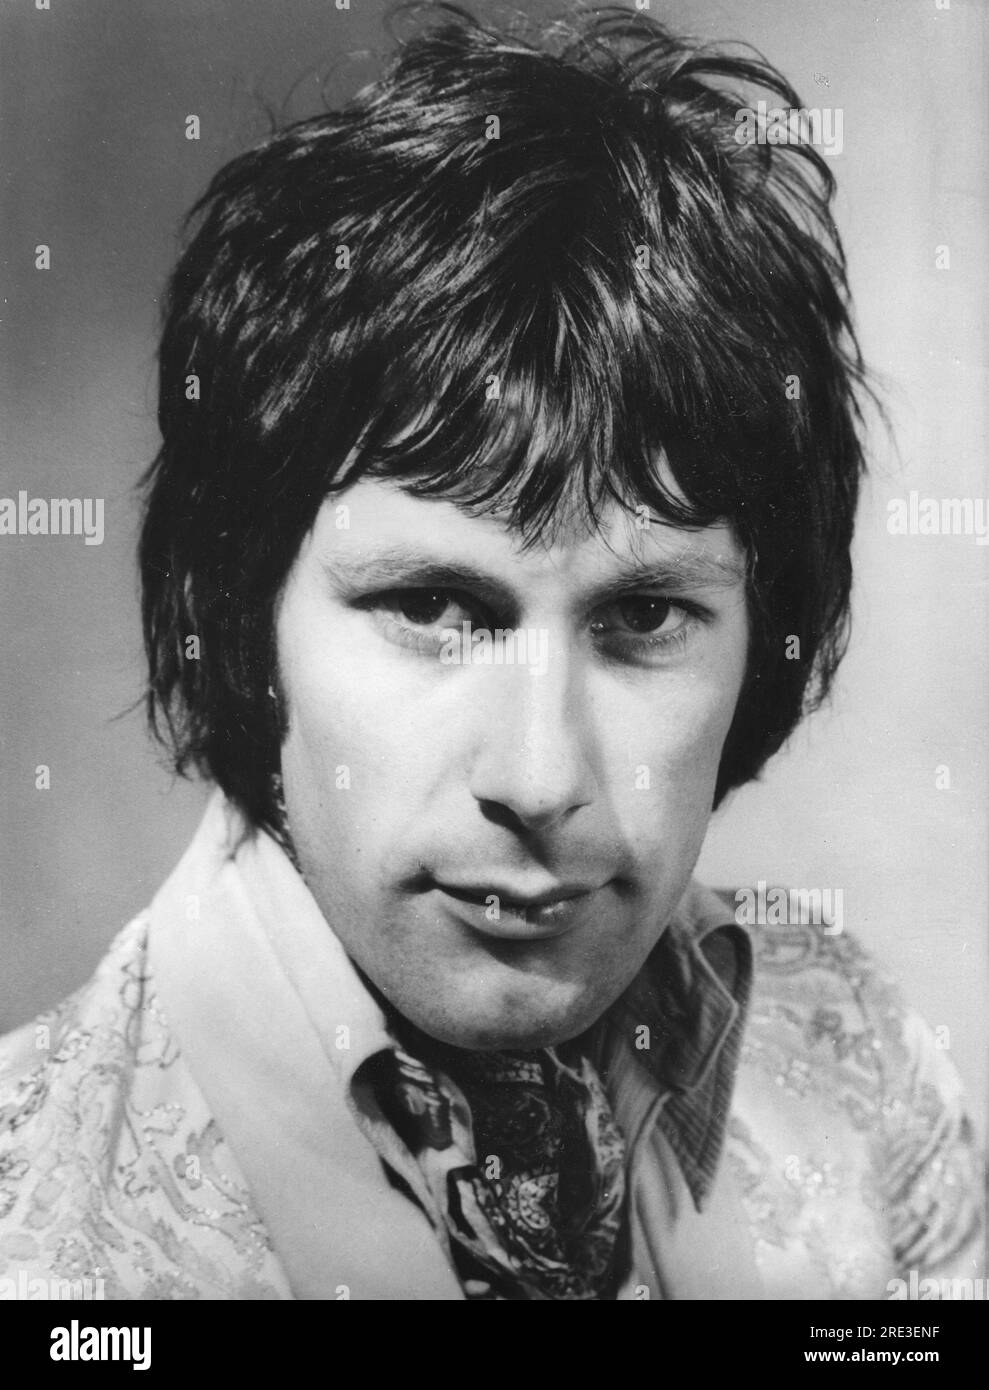 West, Keith, * 6.12.1943, cantante rock britannico, membro del gruppo rock psichedelico Tomorrow, 1967, ADDITIONAL-RIGHTS-CLEARANCE-INFO-NOT-AVAILABLE Foto Stock